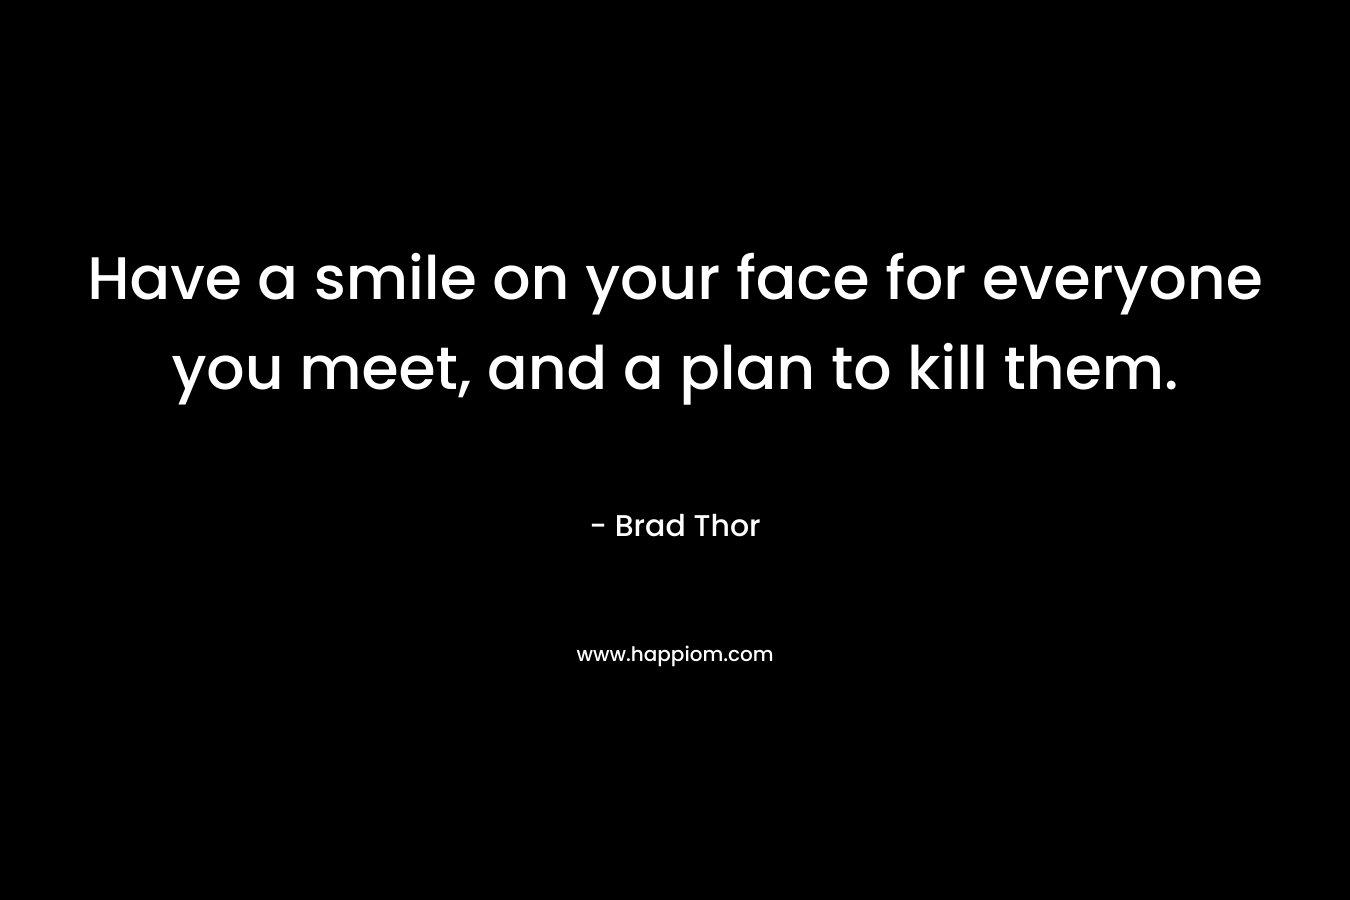 Have a smile on your face for everyone you meet, and a plan to kill them. – Brad Thor